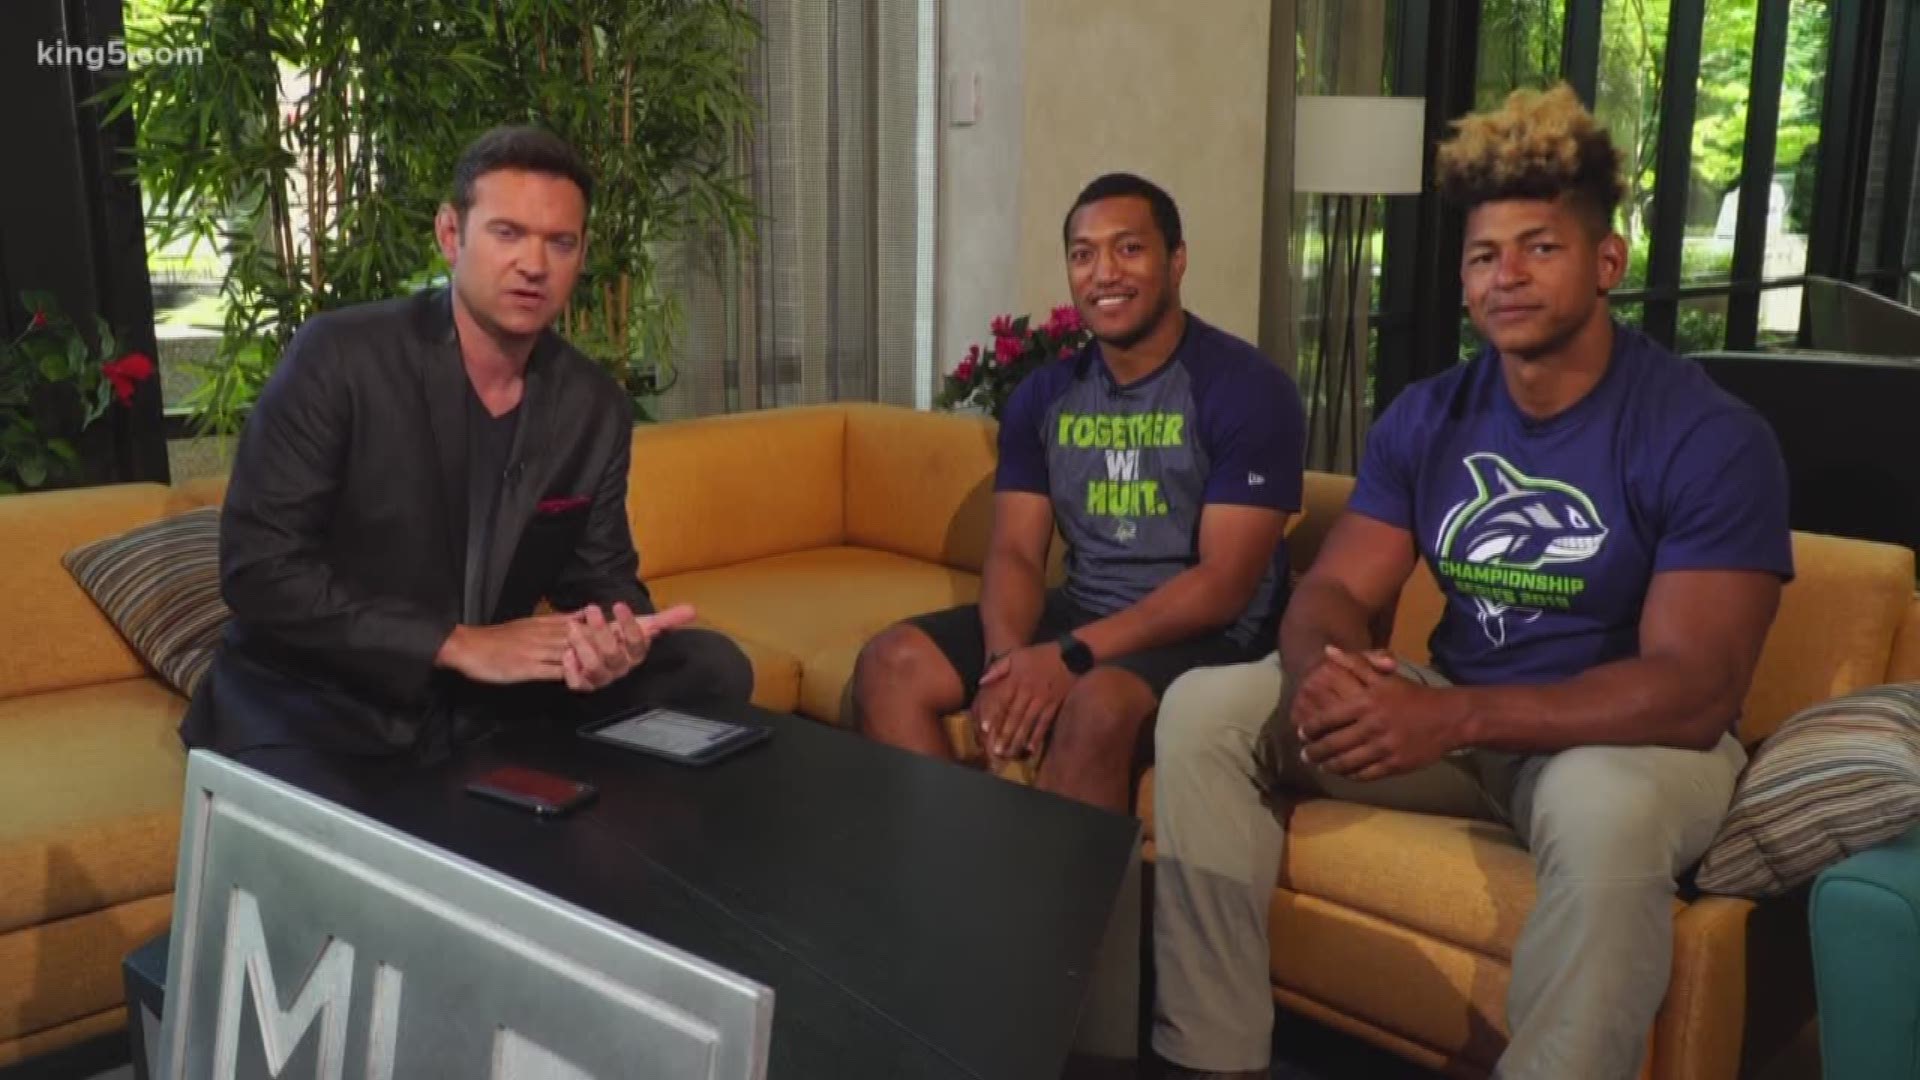 Players from the Seattle Seawolves stopped by KING 5's Take 5 to discuss their 2nd rugby championship and their great work in the community.